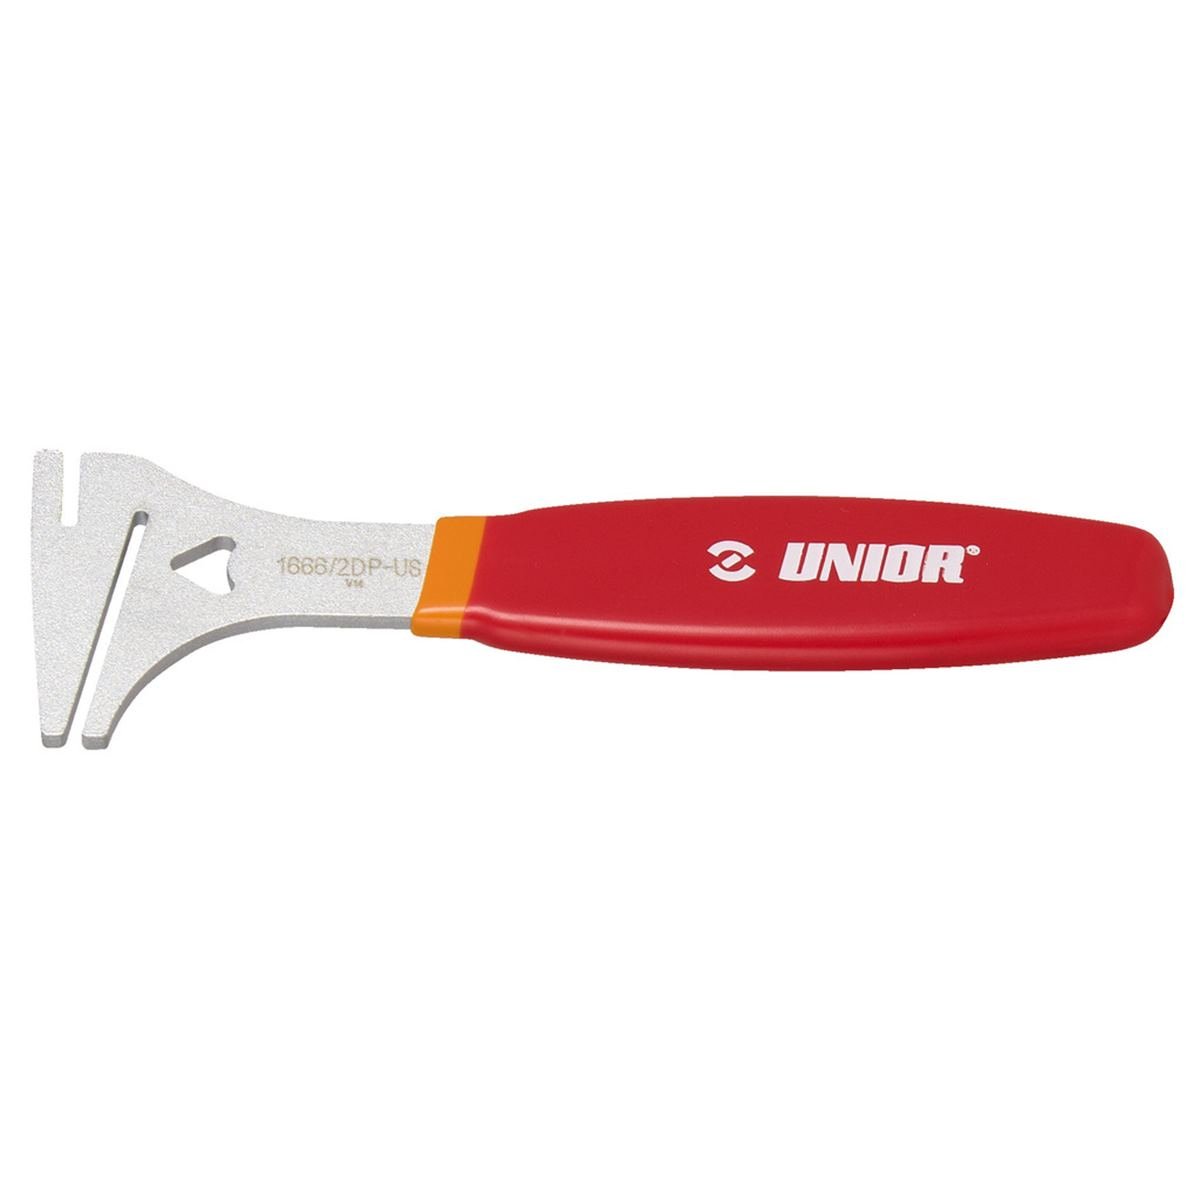 Unior Brake Disk Wrench  Rubber coated handle